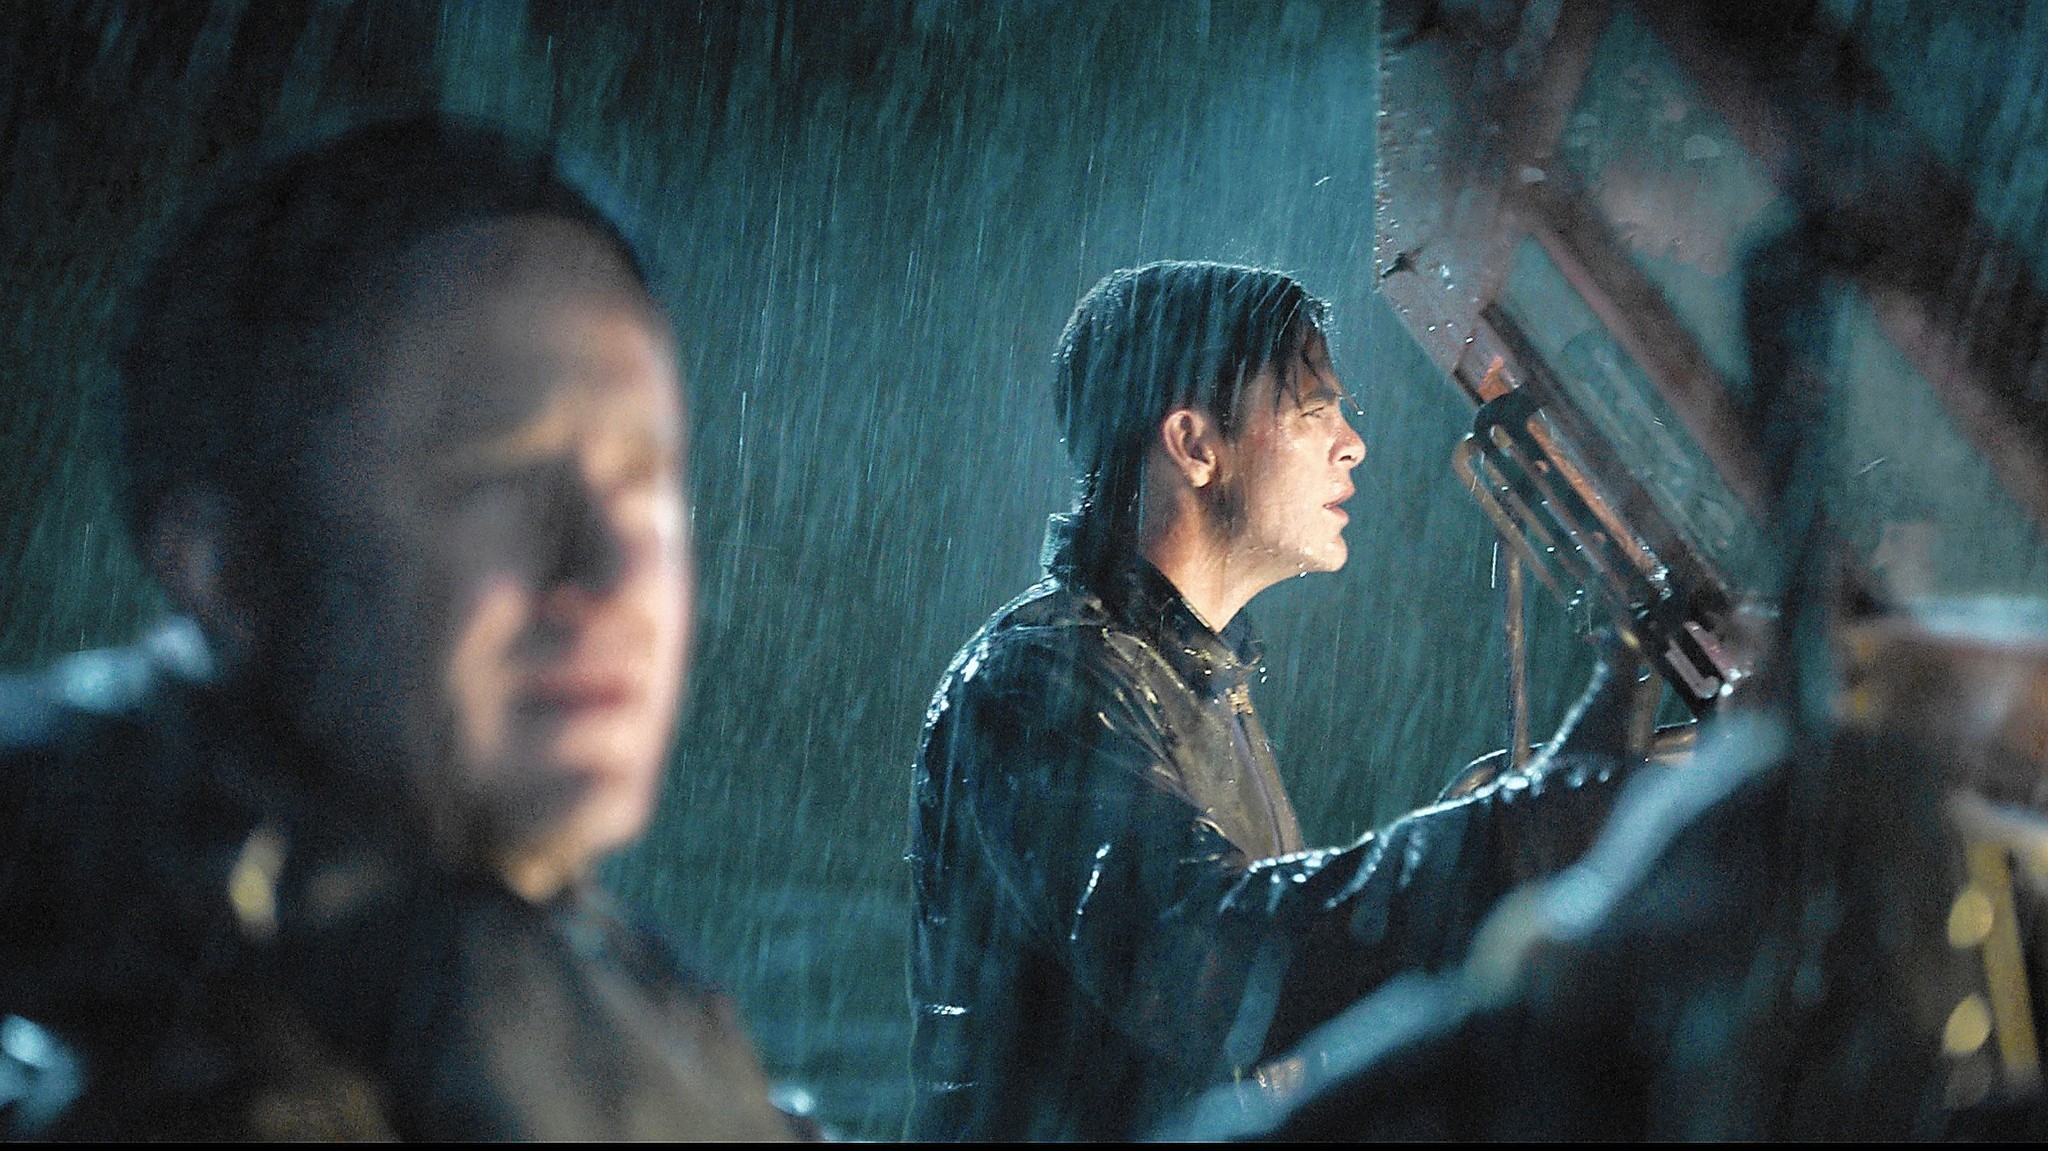 The Finest Hours #14